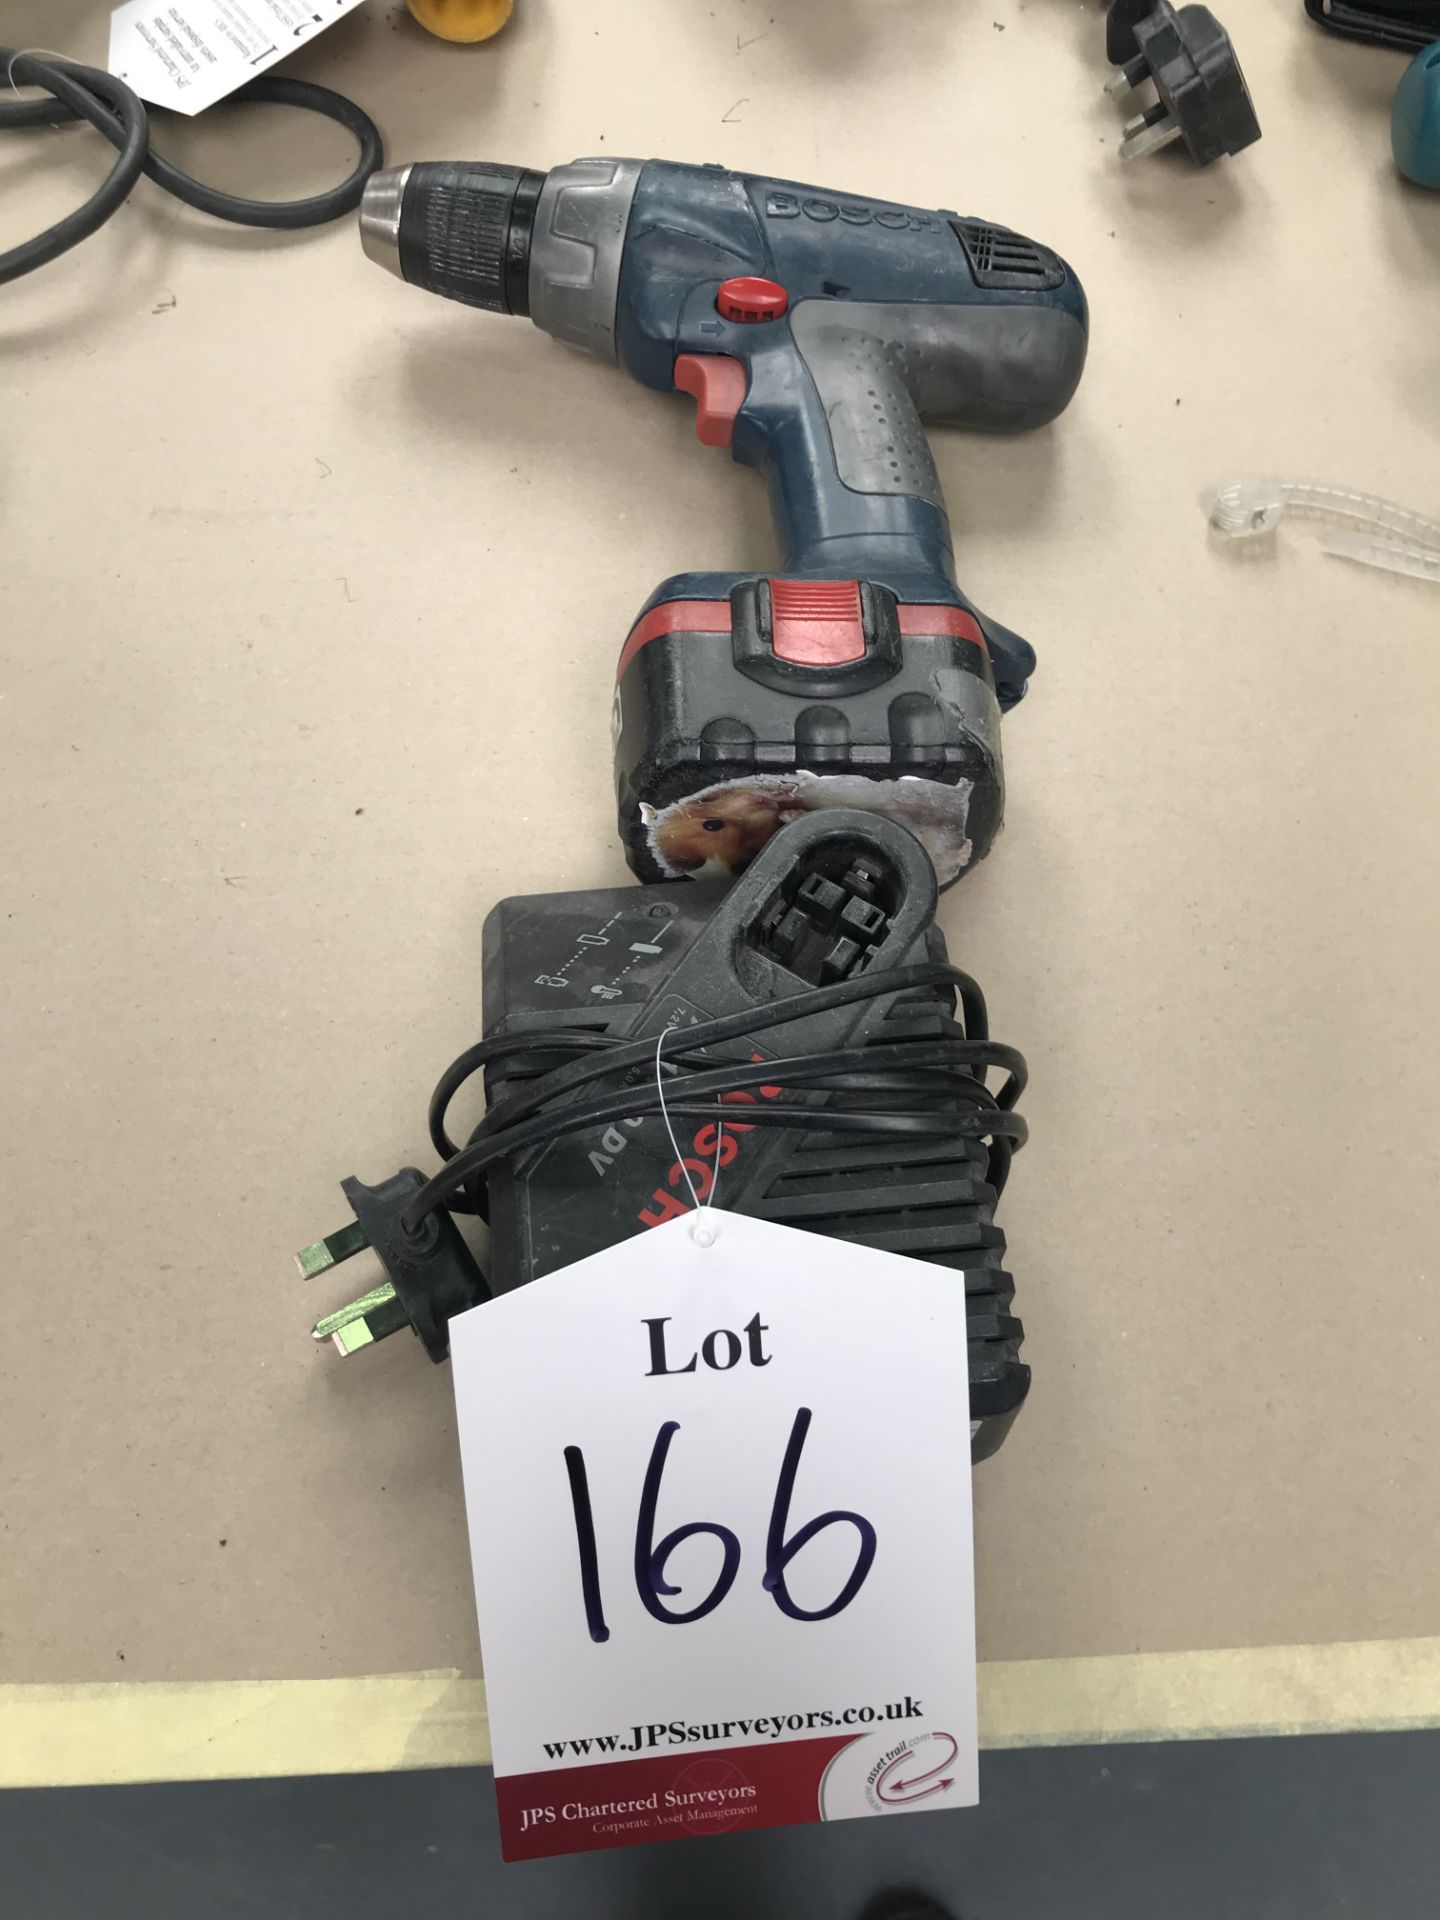 Bosch Power Drill w/ Charging Station - No sticker for model